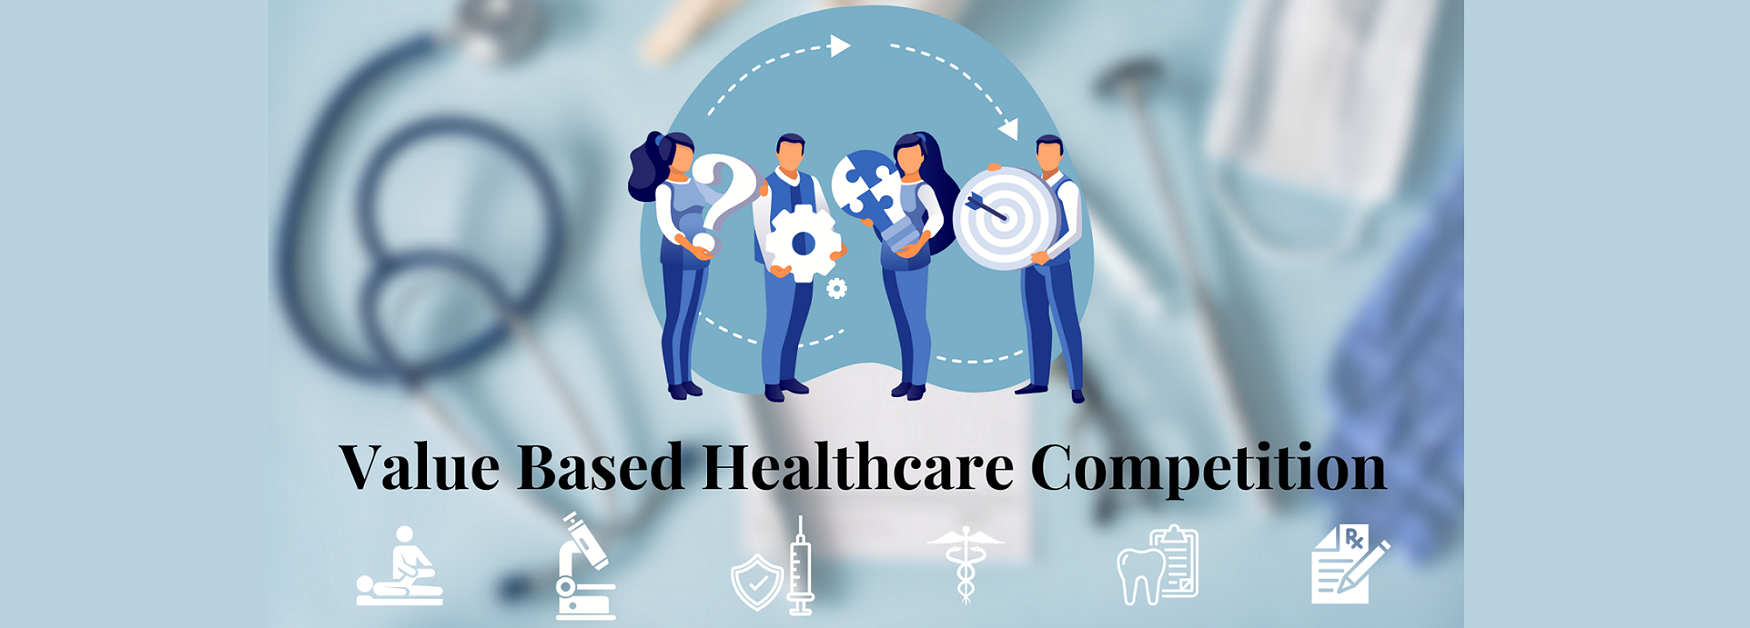 Medical icons and blurred medical equipment background with words "Value Based Healthcare Competition"